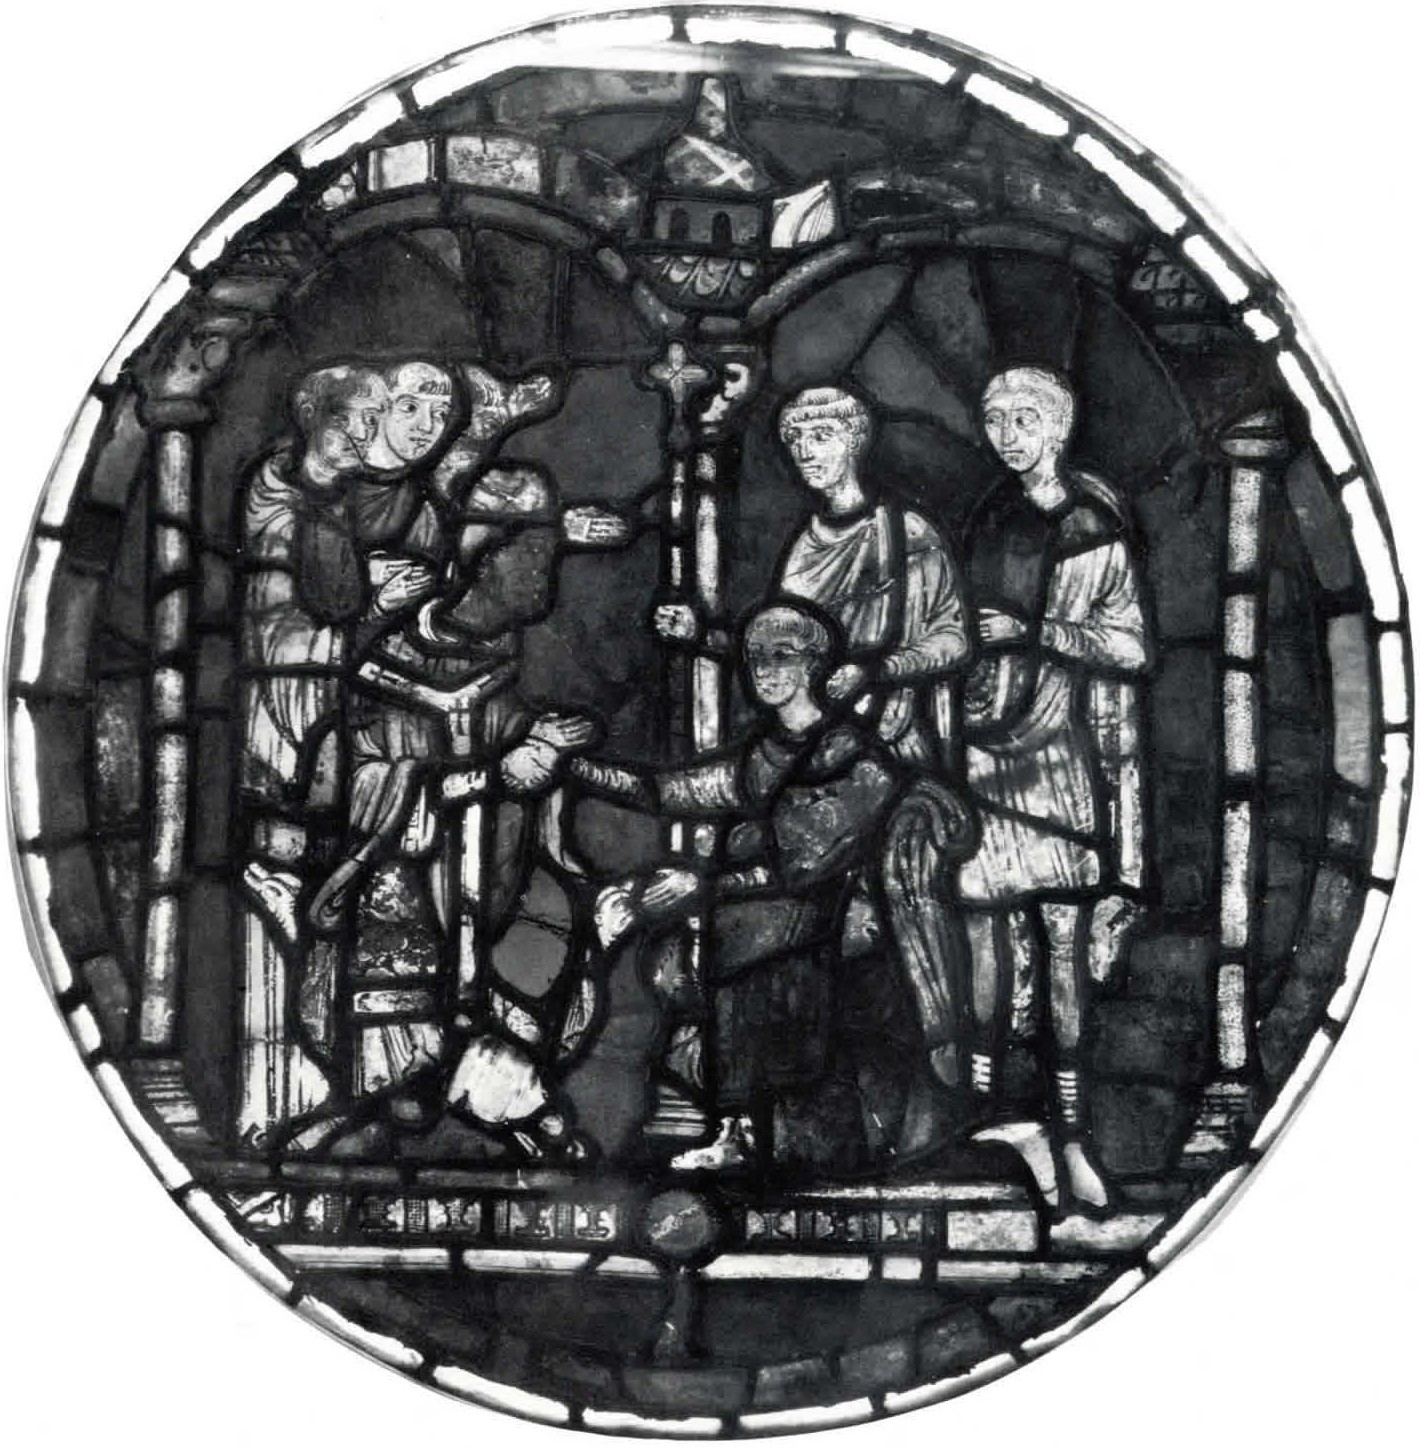 SCENE FROM THE LIFE OF THOMAS BECKET